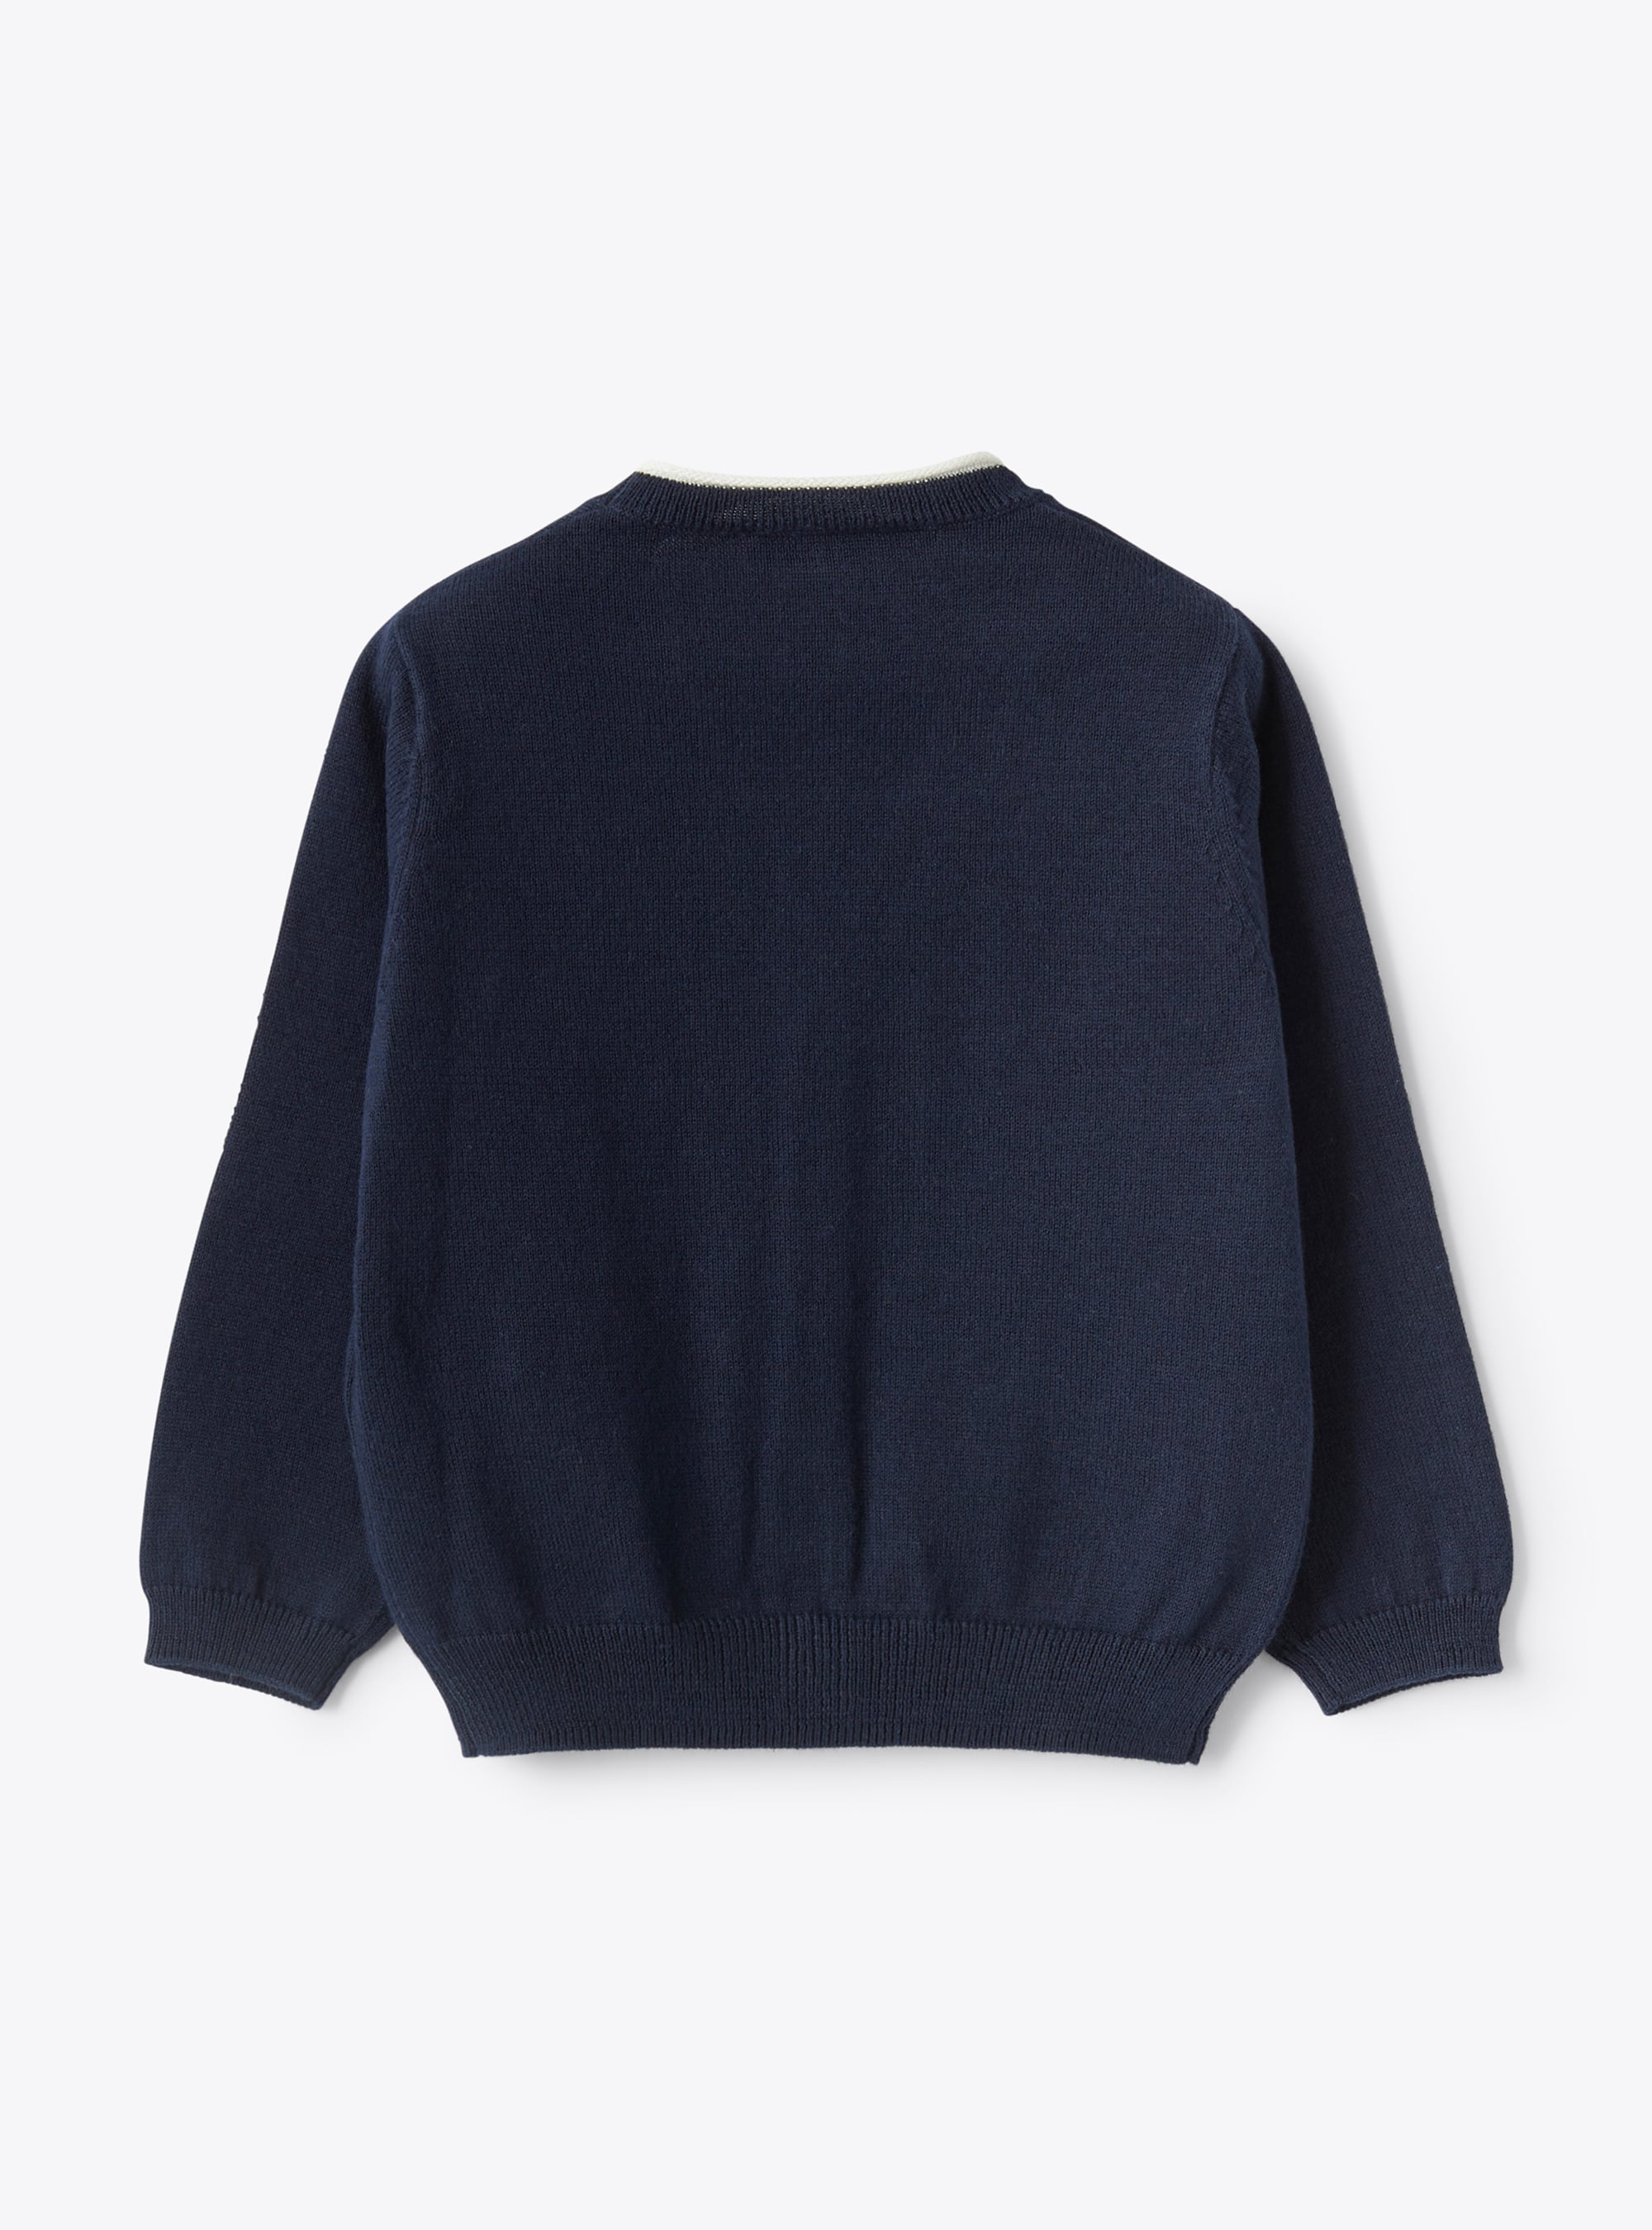 Cardigan in organic cotton with contrasting piping - Blue | Il Gufo